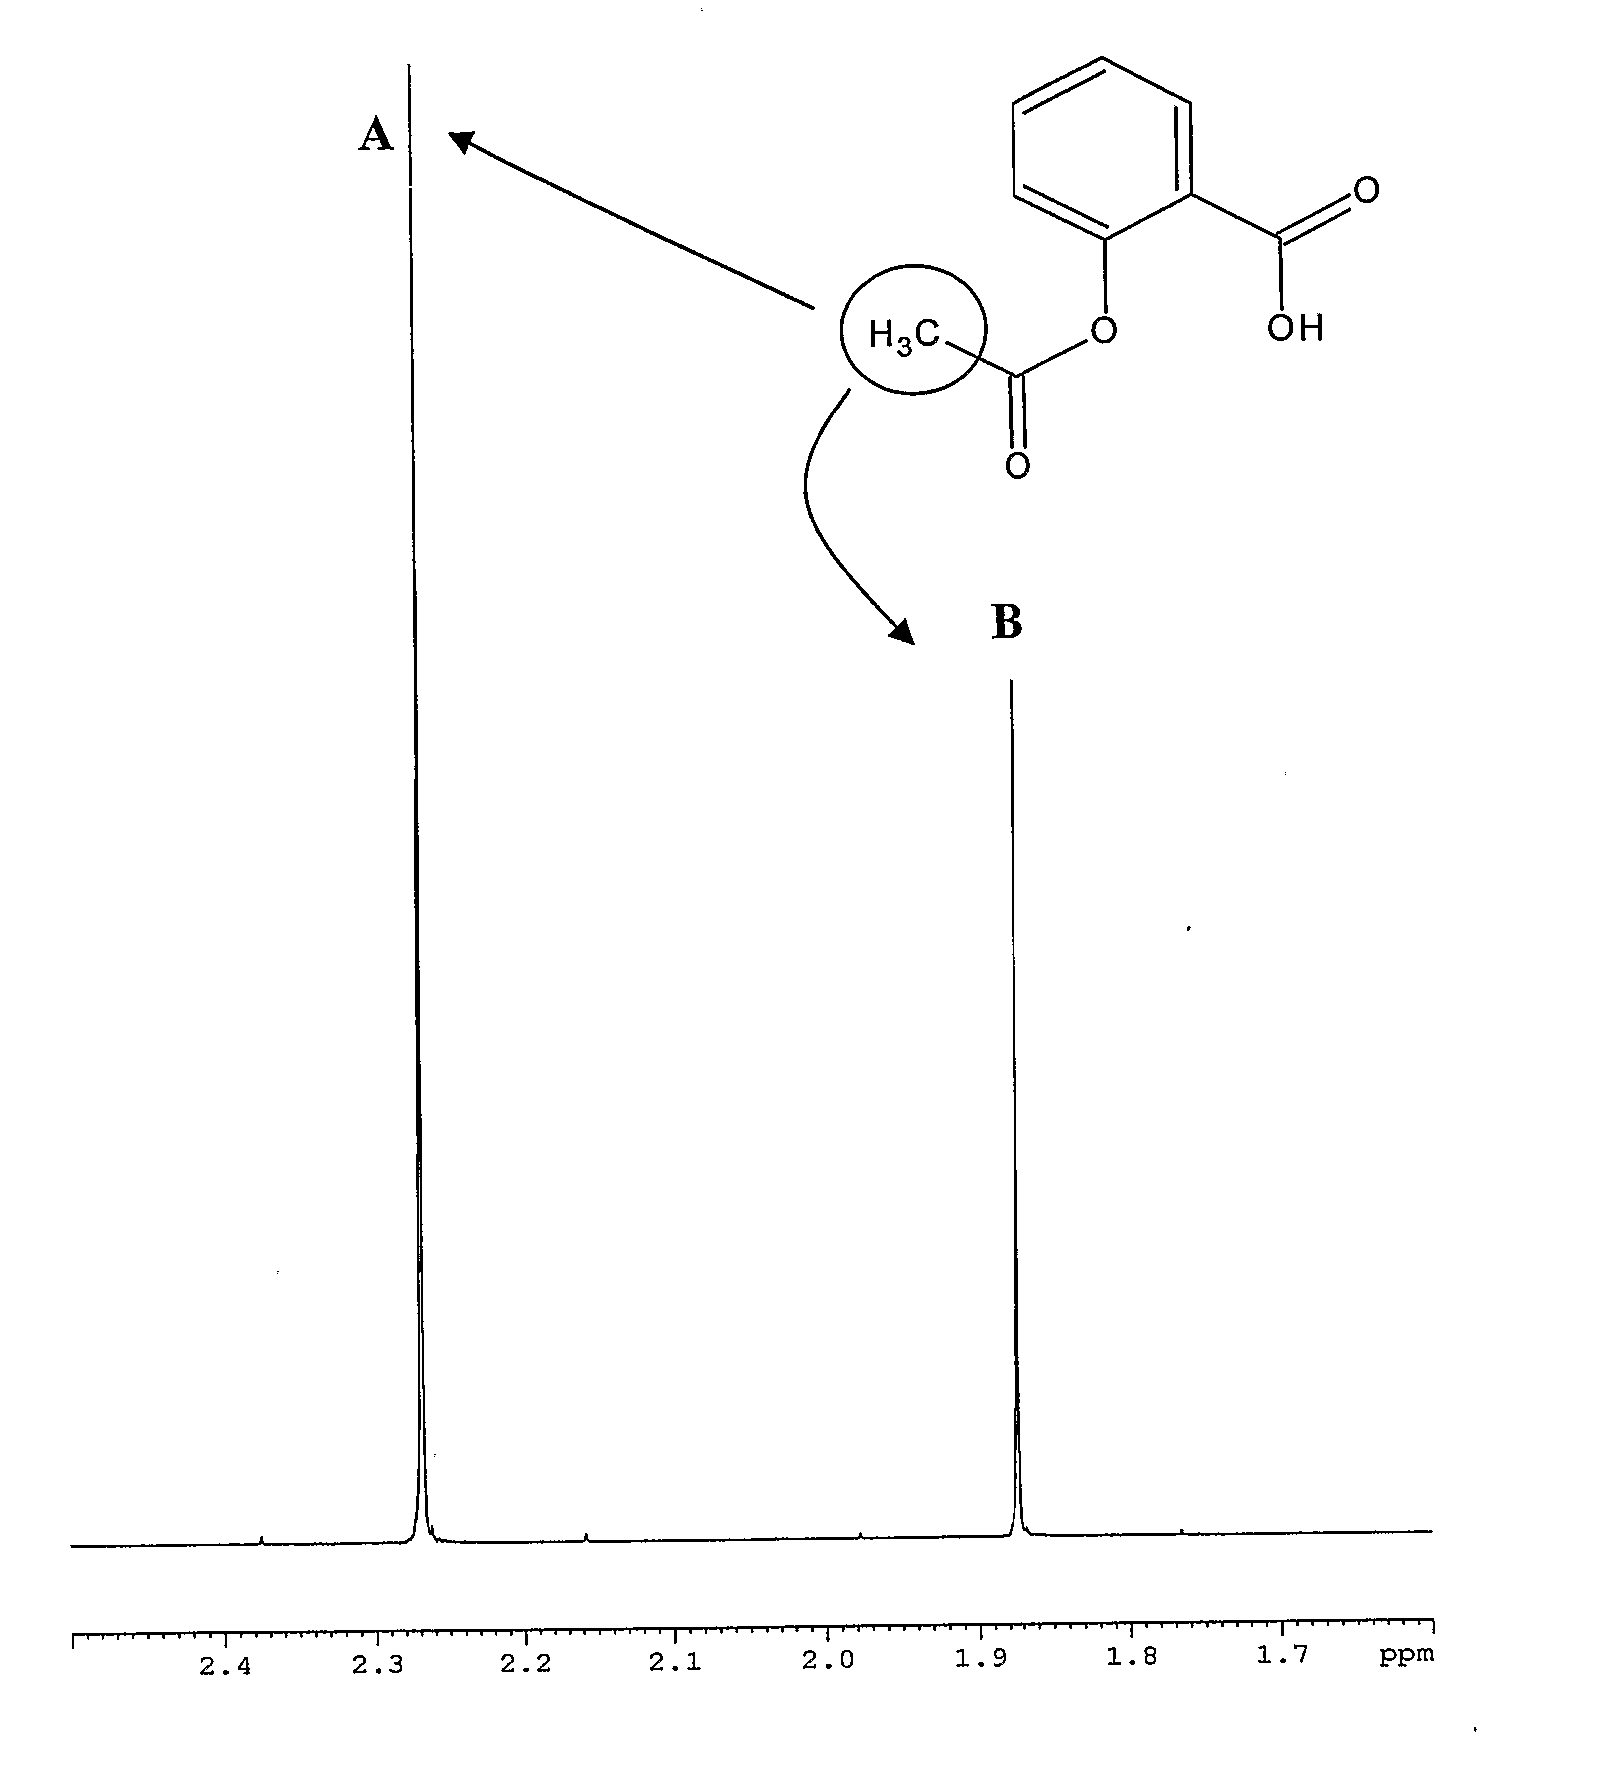 Method for the In Vitro Determination of Cellular Uptake of Exogenous and Endogenous Substances Using Nmr Shift Agents and the Magic Angle Nmr Technique